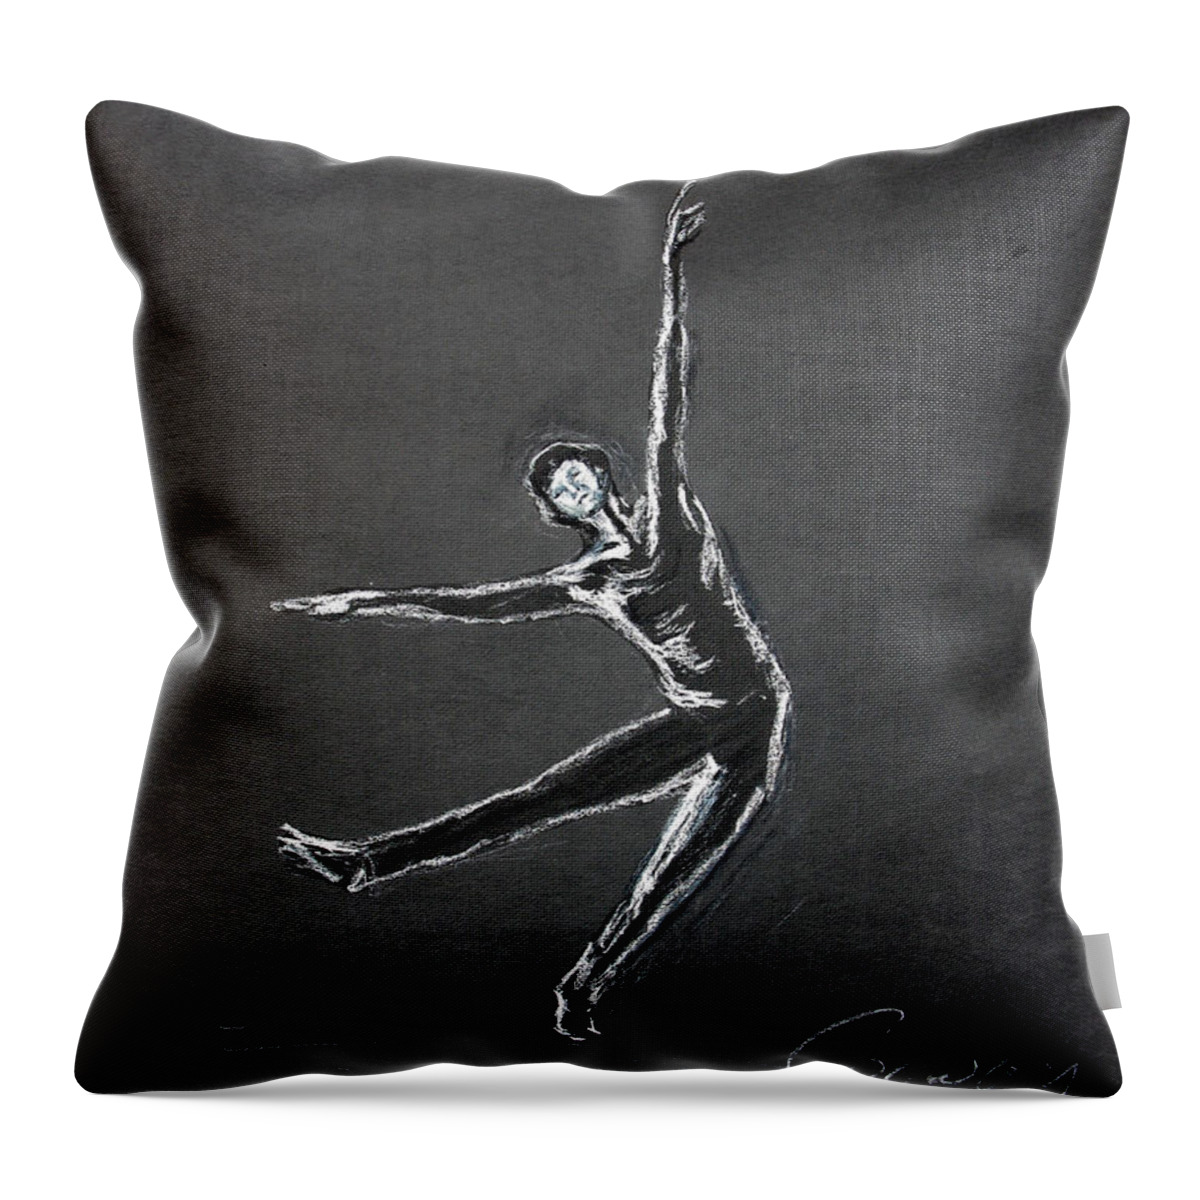 Male Throw Pillow featuring the drawing Male Dancer In White Lines On Black by Tom Conway